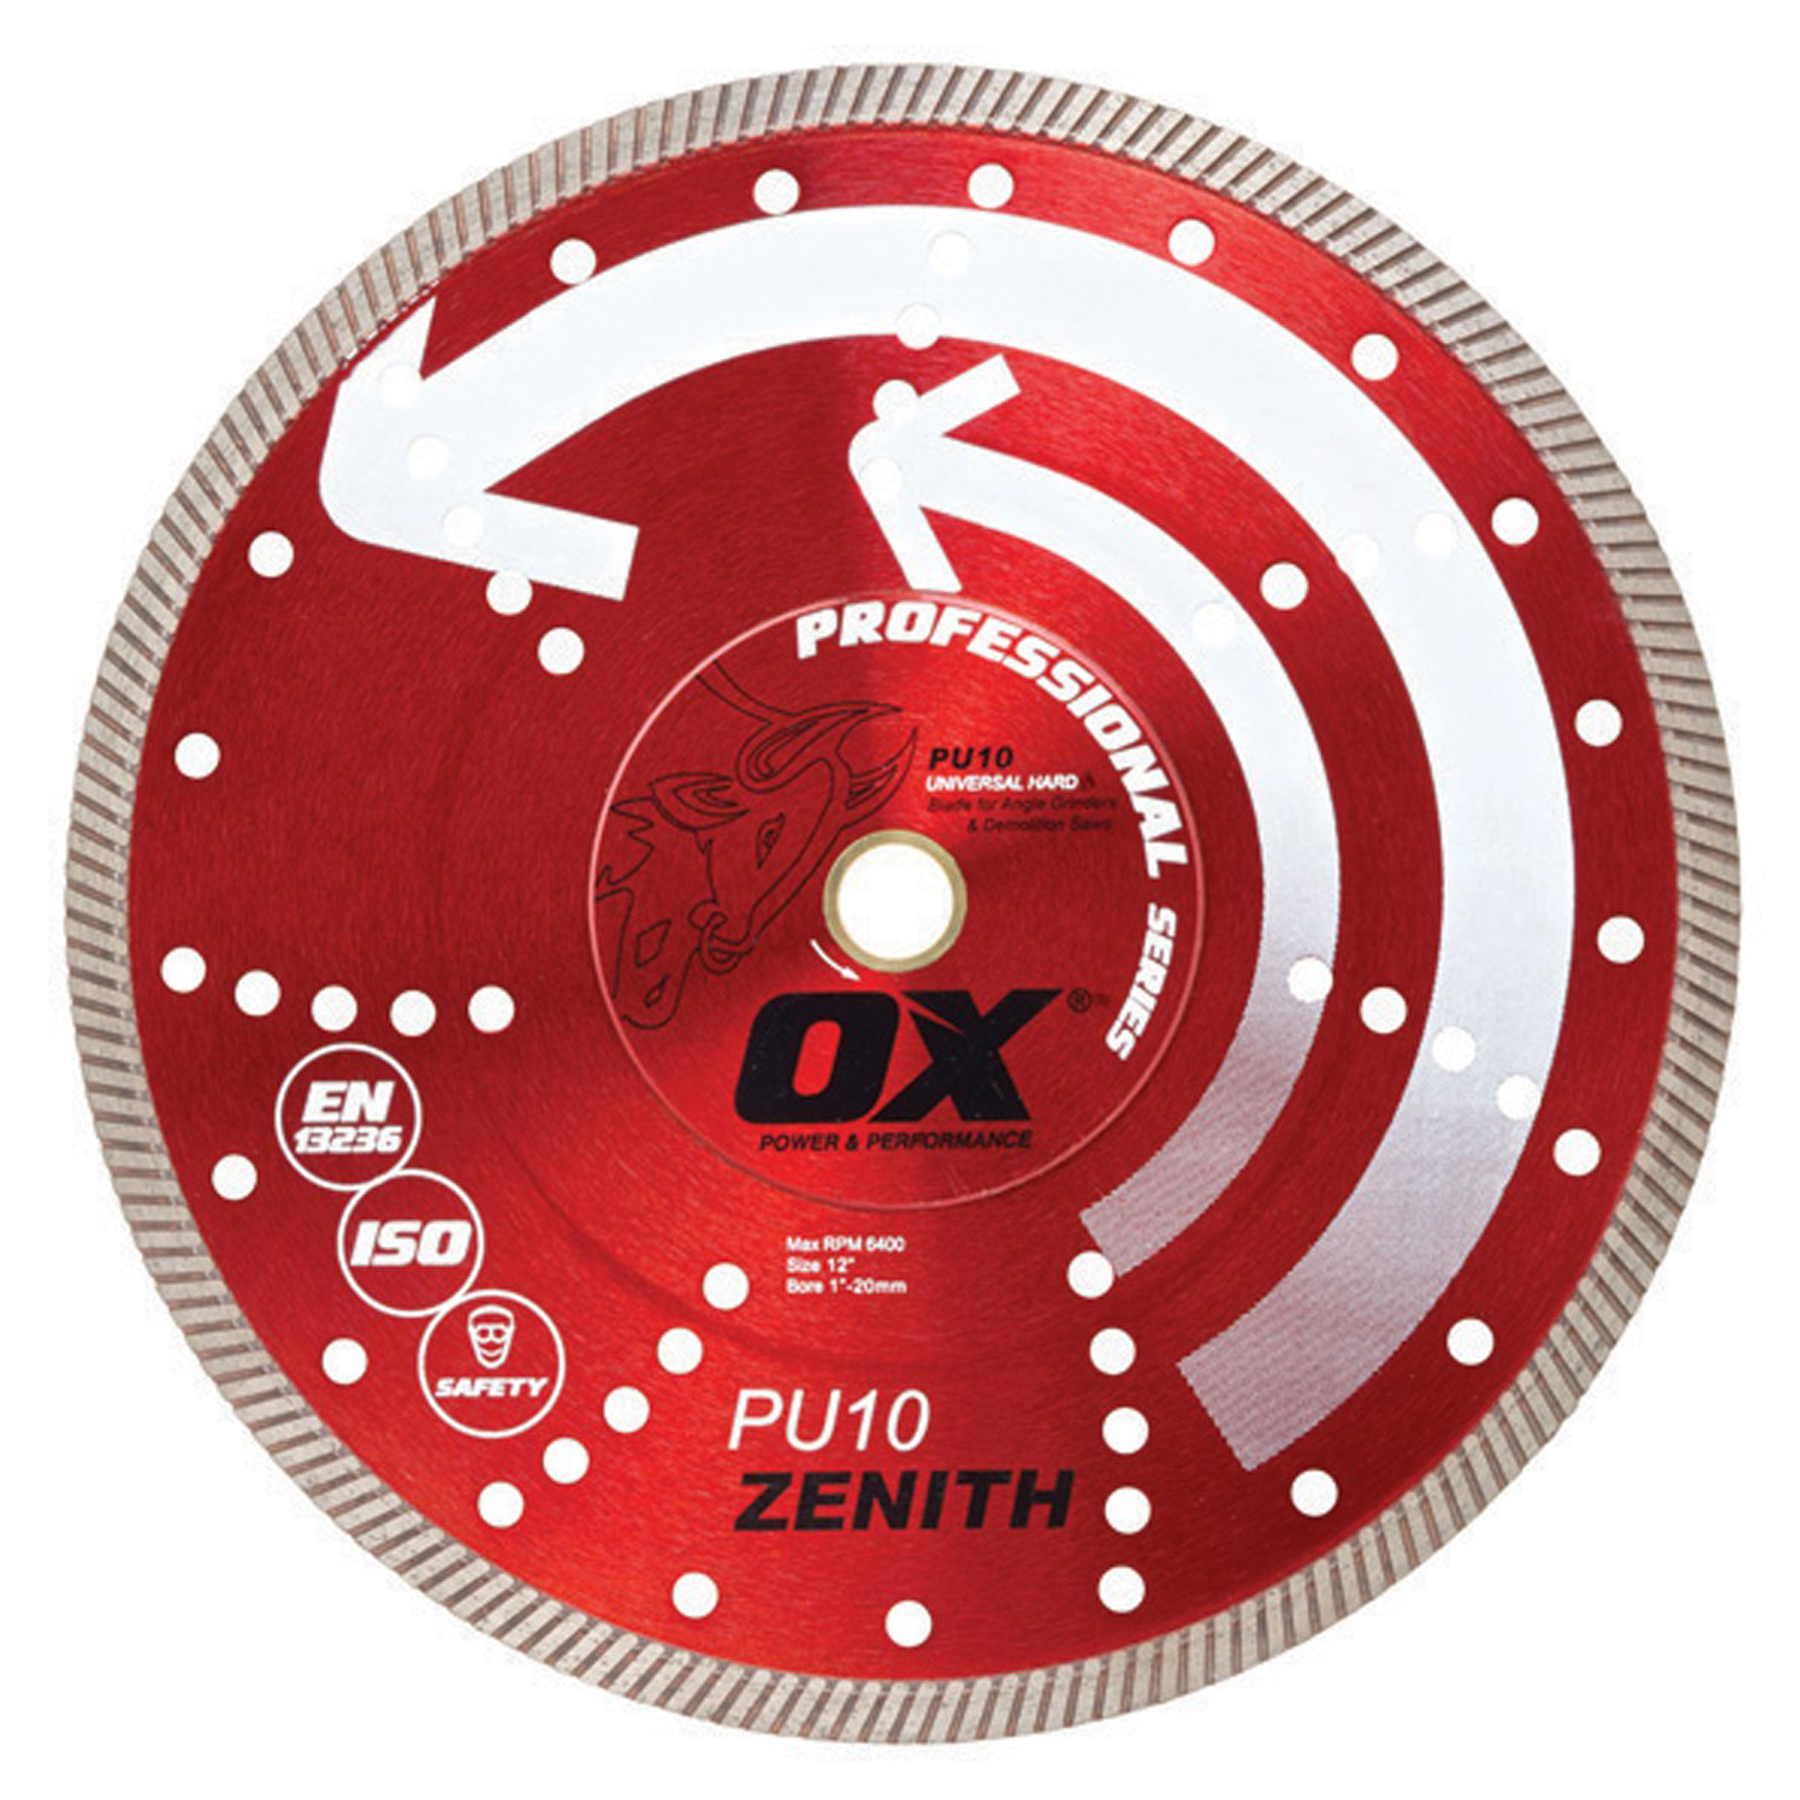 The new OX PU10 cuts the most common materials found on a construction site. It cuts quickly due to its continuous rim design that features an edge that is serrated, giving the blade faster cutting speeds while maintaining a smooth cut. 